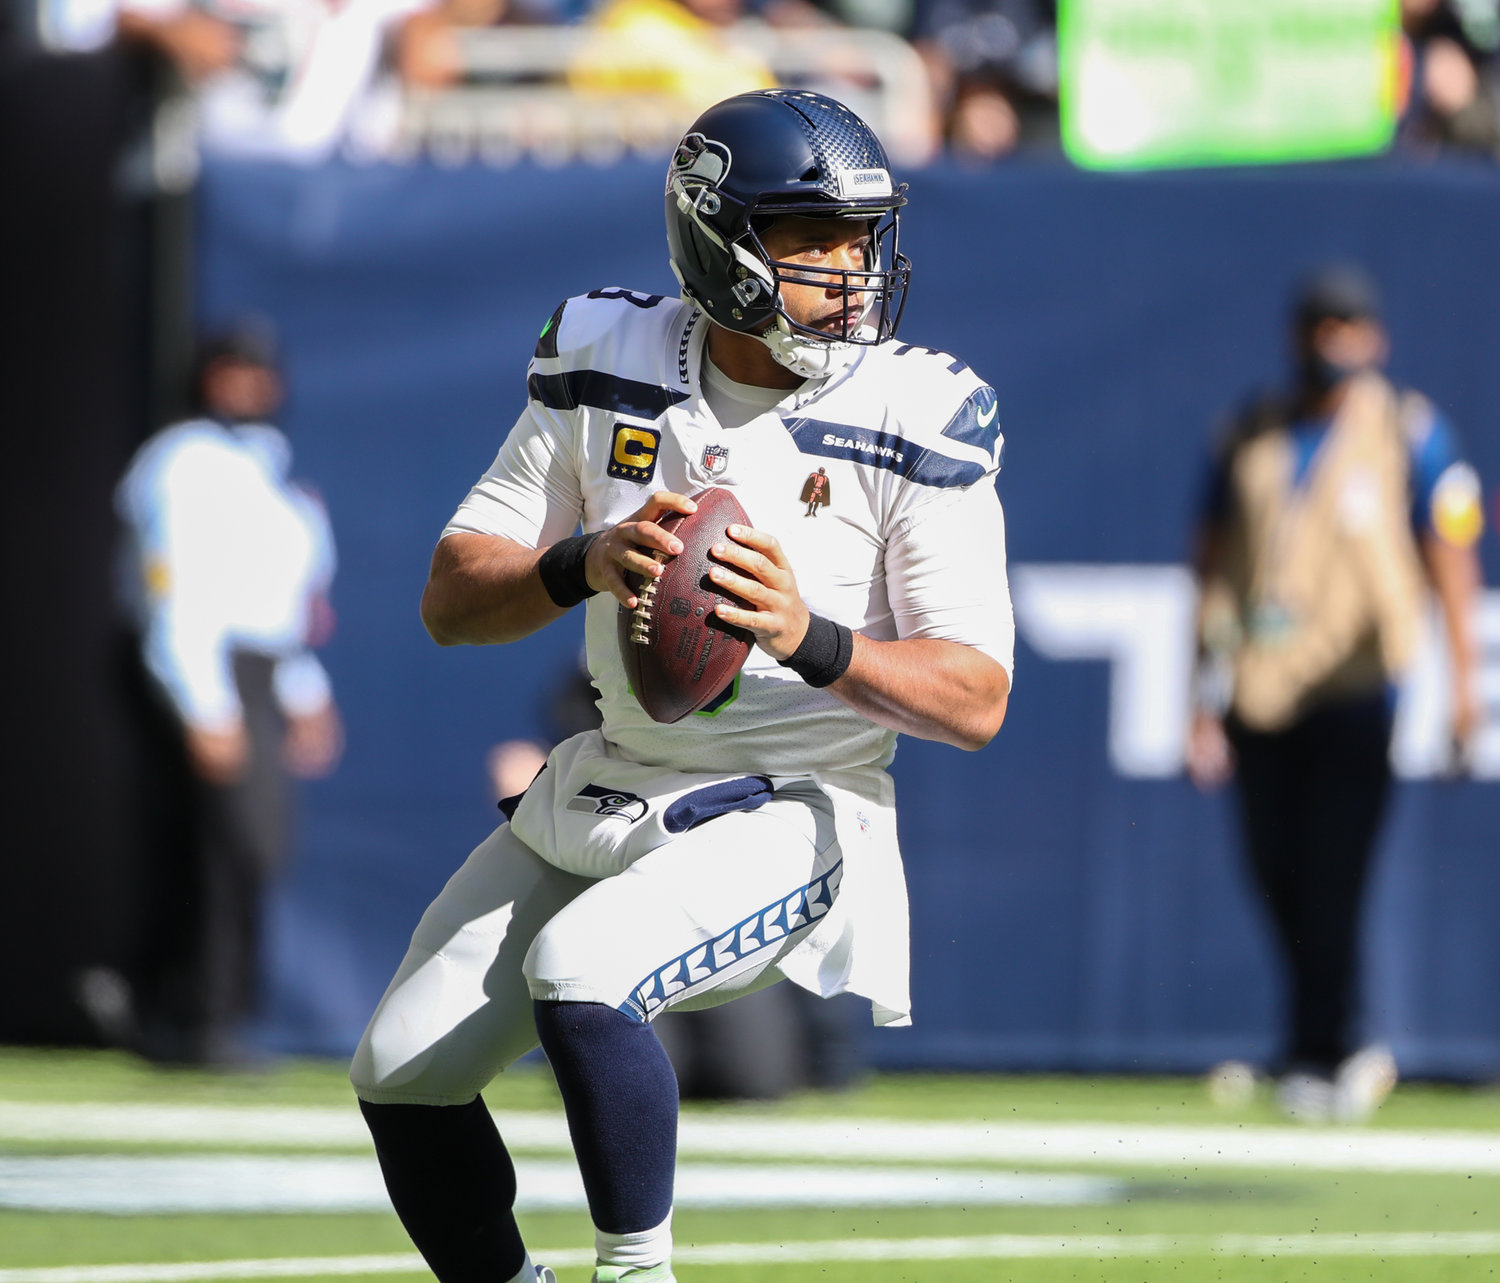 Seattle Seahawks quarterback Russell Wilson (3) drops back to pass during the first half of an NFL game between the Seahawks and the Texans on December 12, 2021 in Houston, Texas.